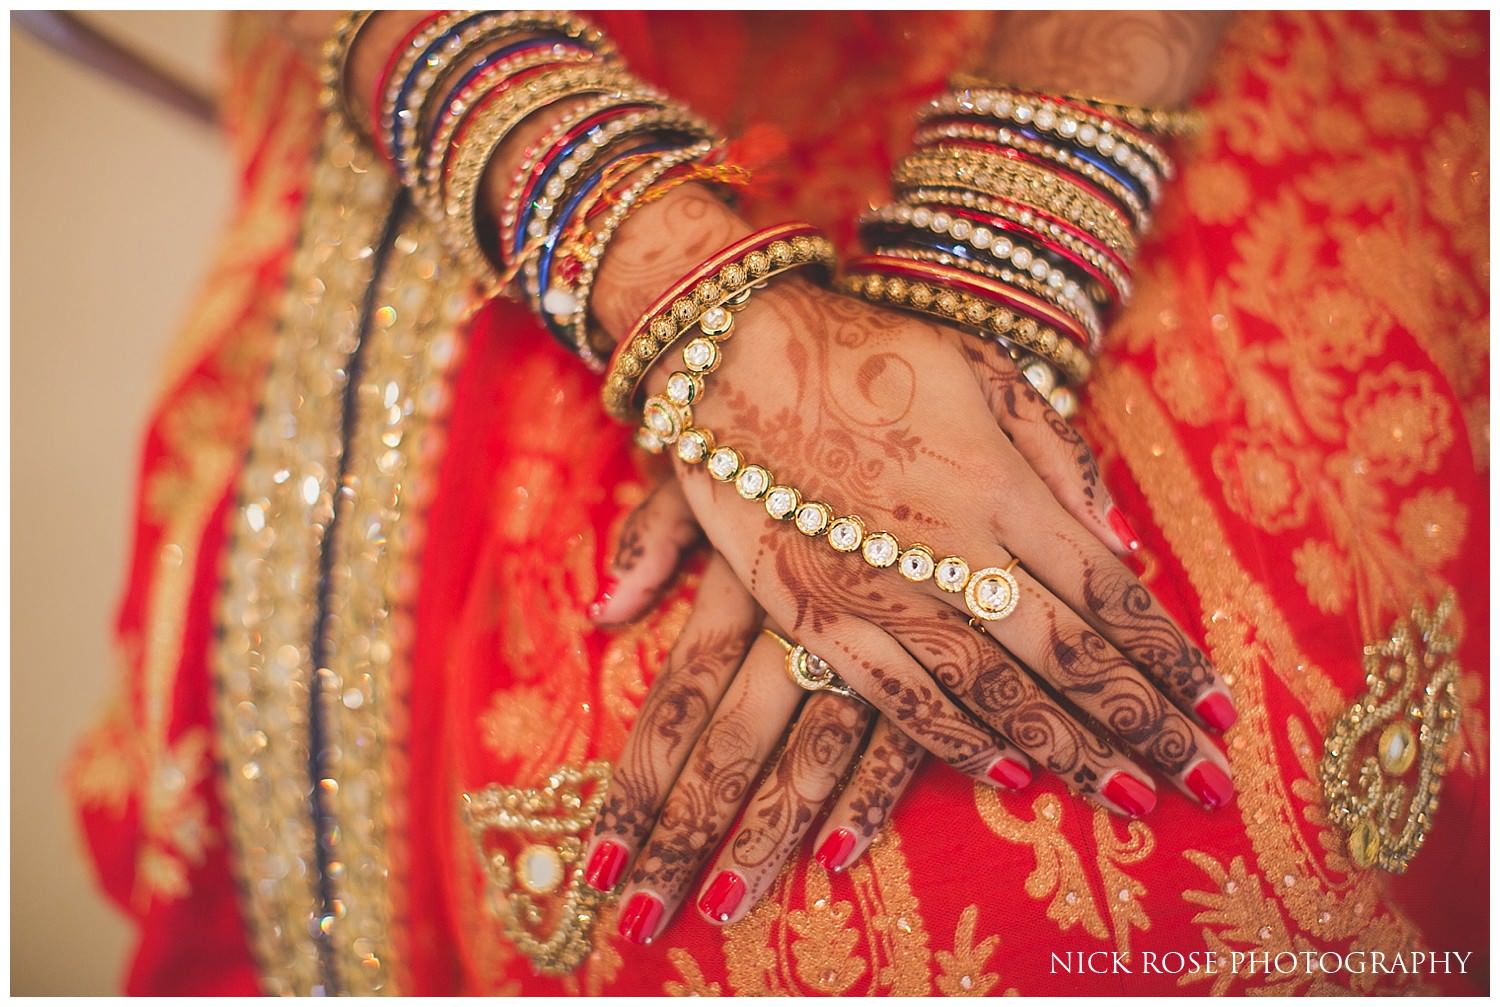  Indian bride with hands crossed on lap for an East Wintergarden wedding in Canary Wharf London 